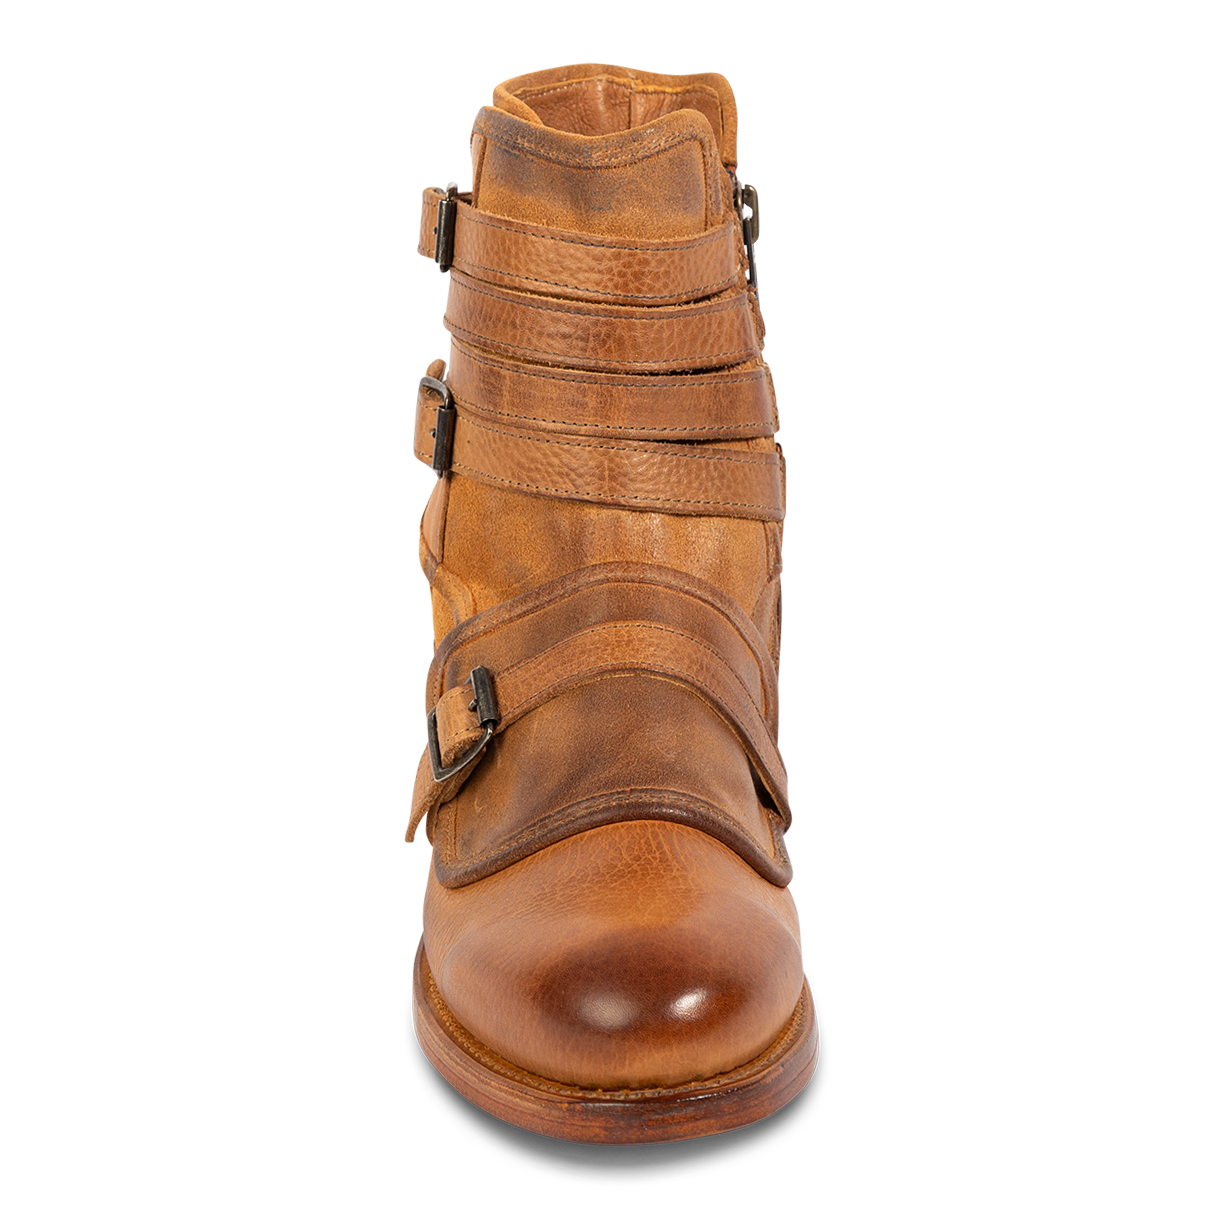 Front view showing multi strap construction with suede and leather upper shaft on FREEBIRD men's Pantera tan boot